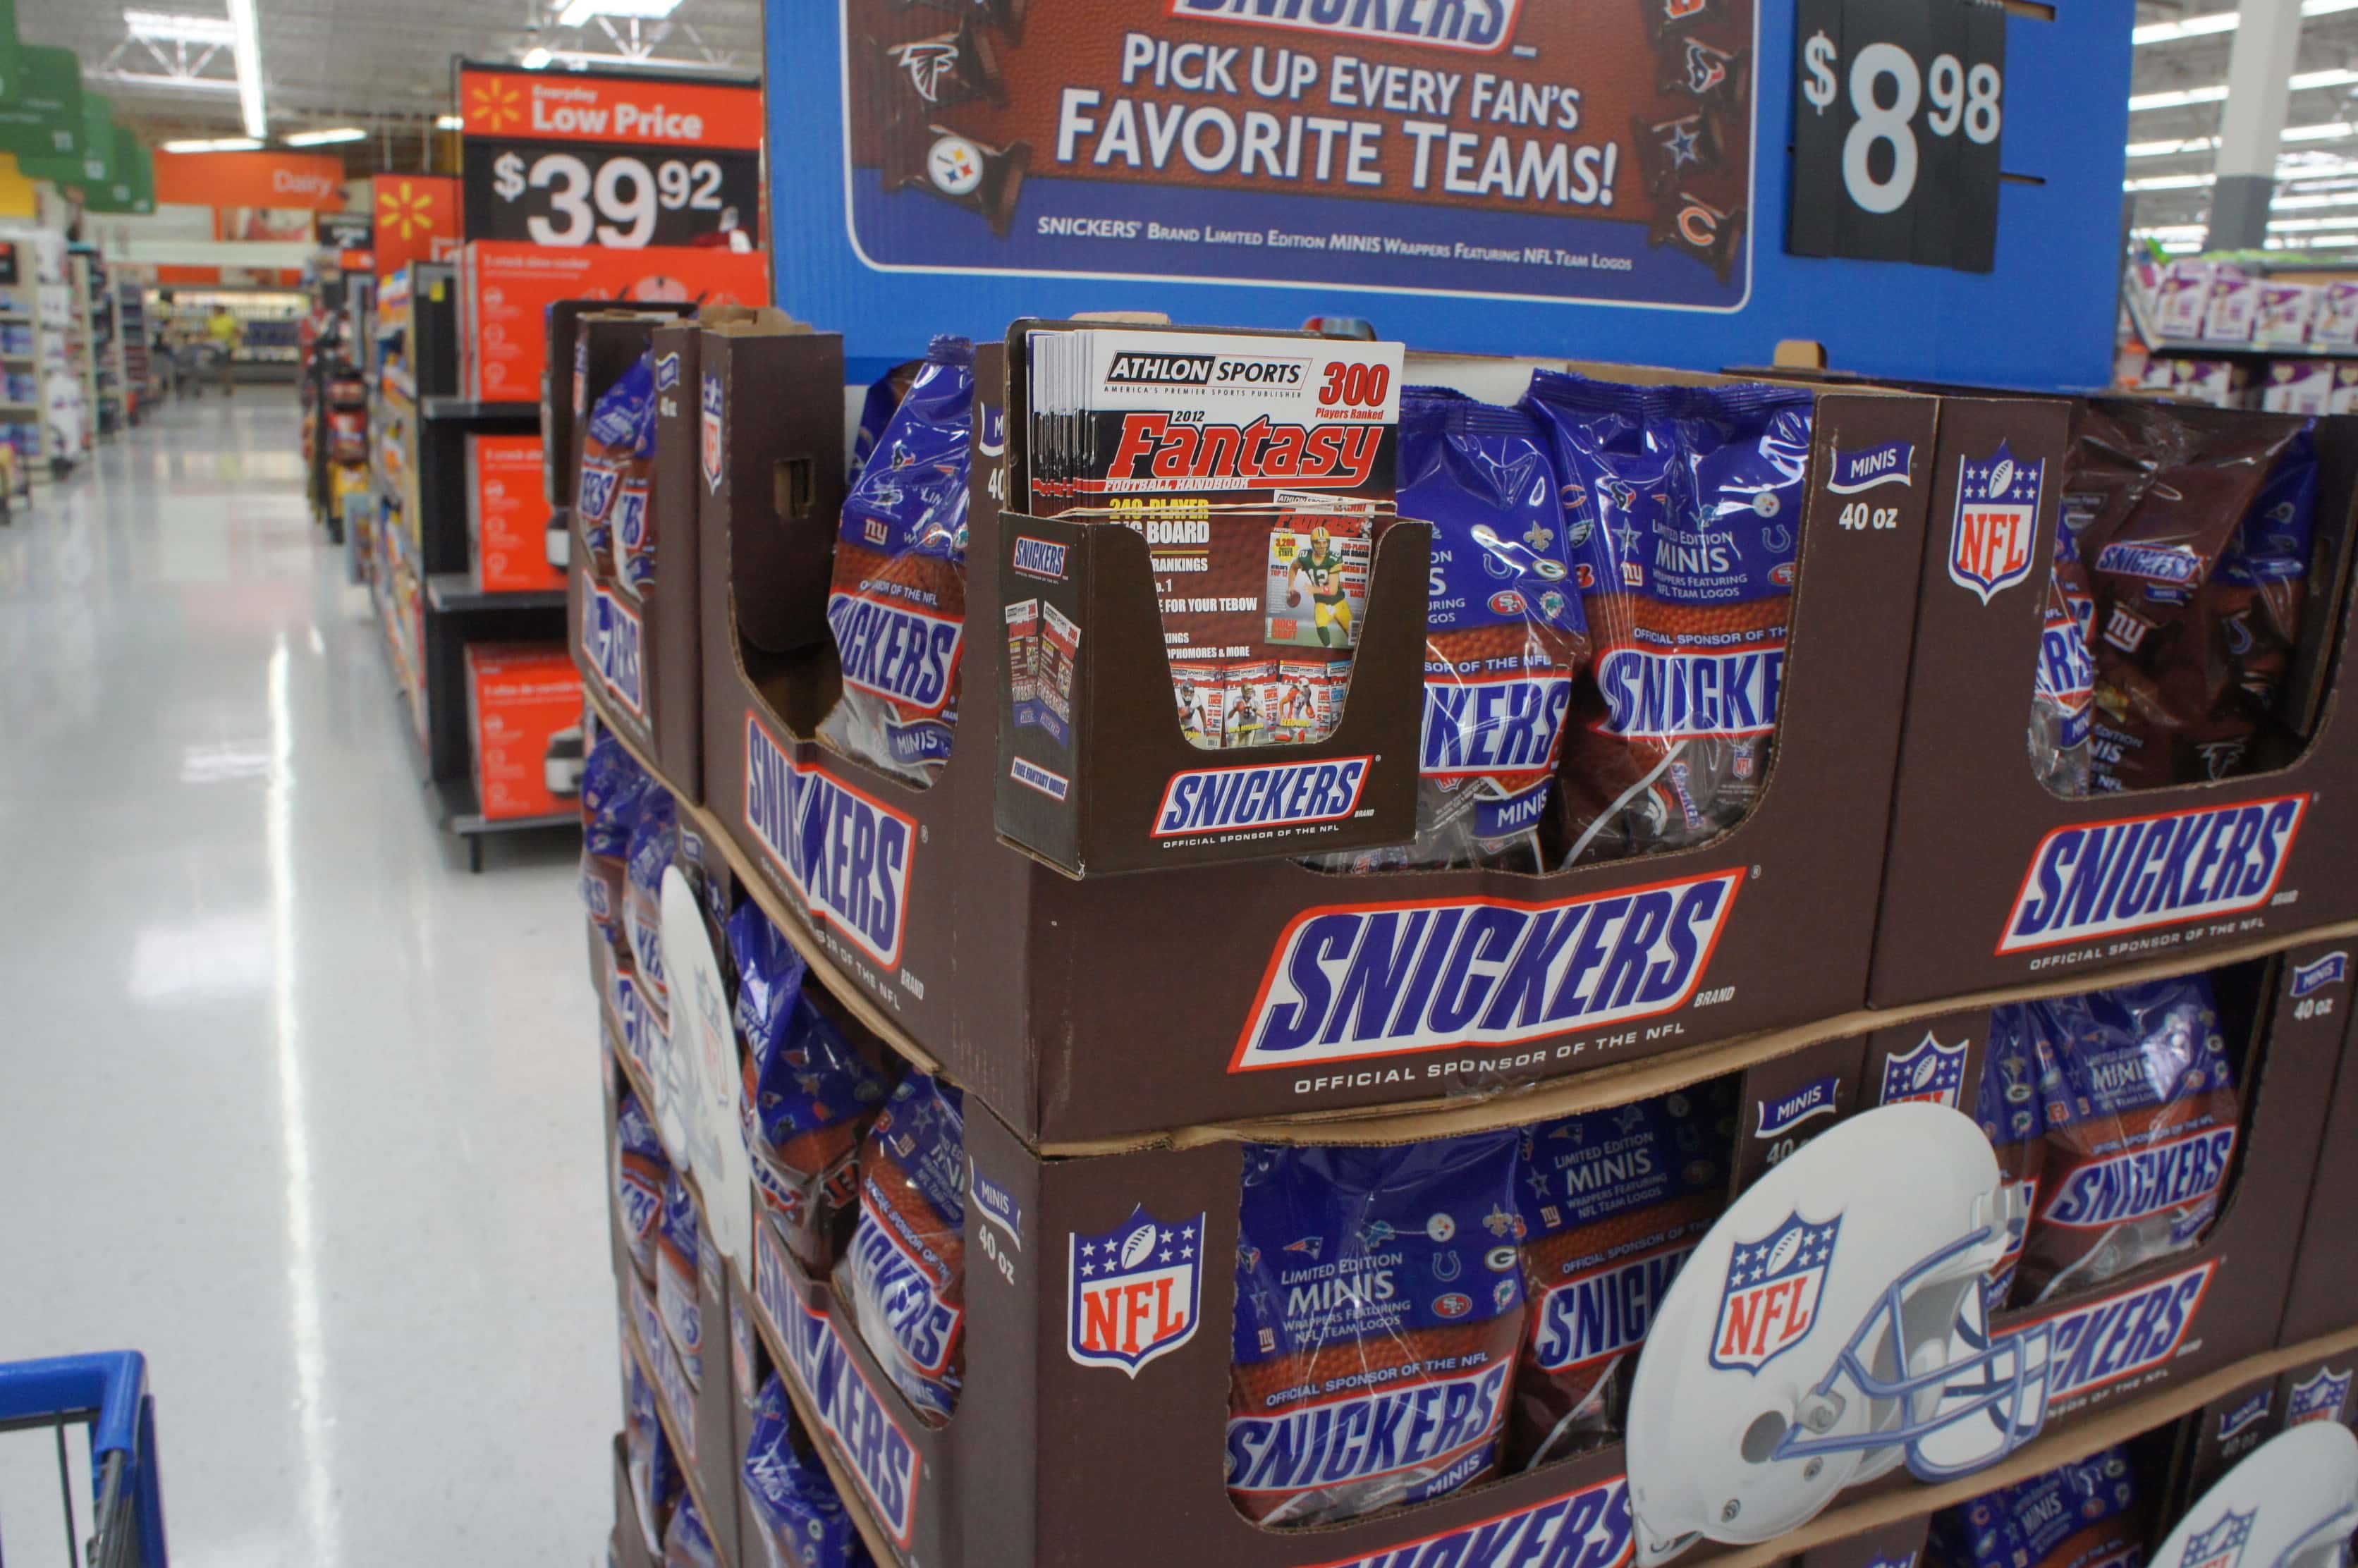 snickers nfl minis